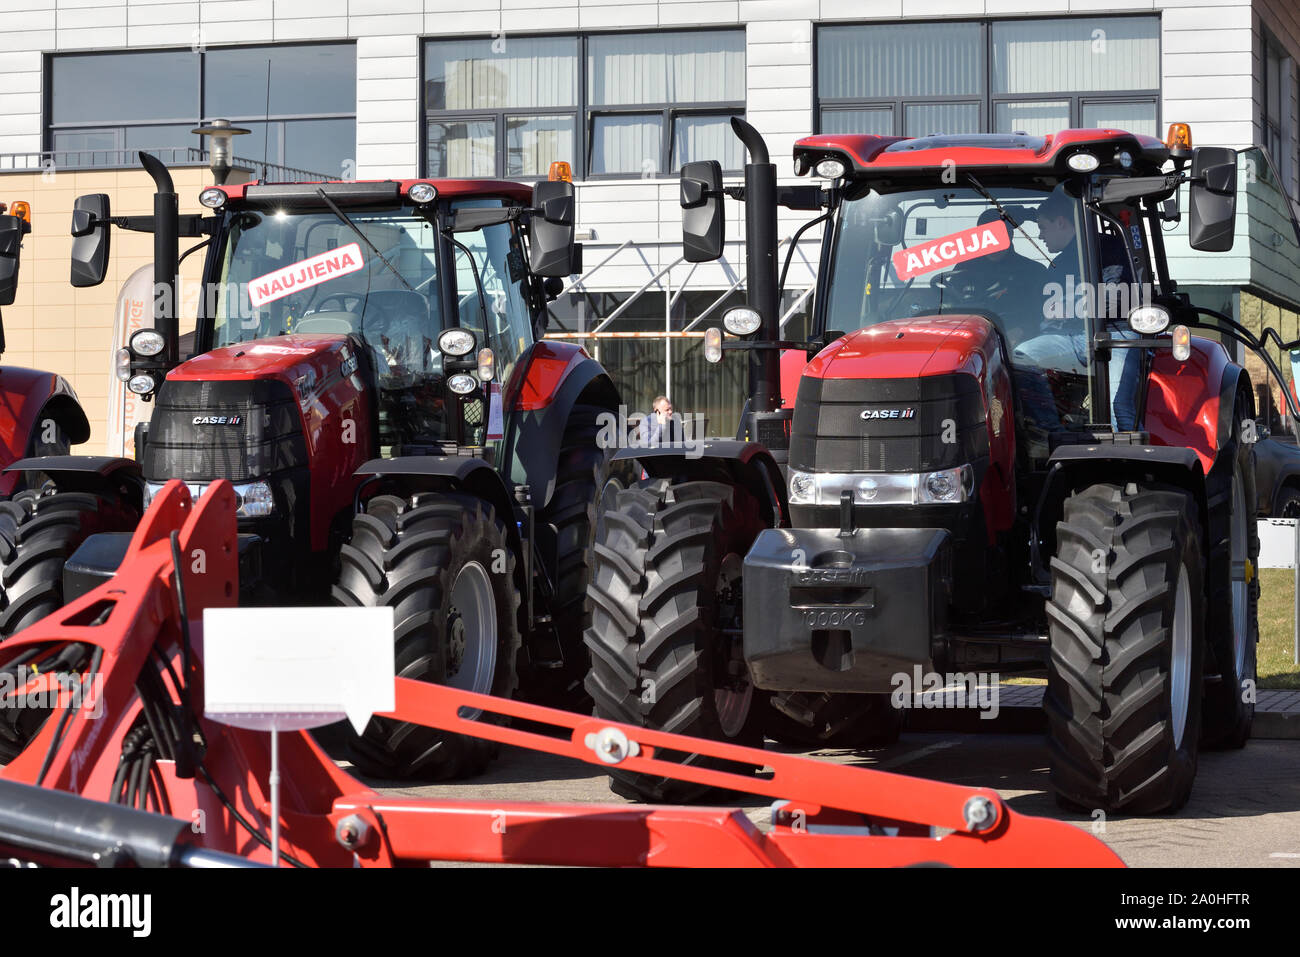 Kaunas, Lithuania - April 04: Case IH tractor and brand logo in Kaunas on  April 04, 2019. Case IH is a brand of agricultural equipment, owned by CNH  I Stock Photo - Alamy